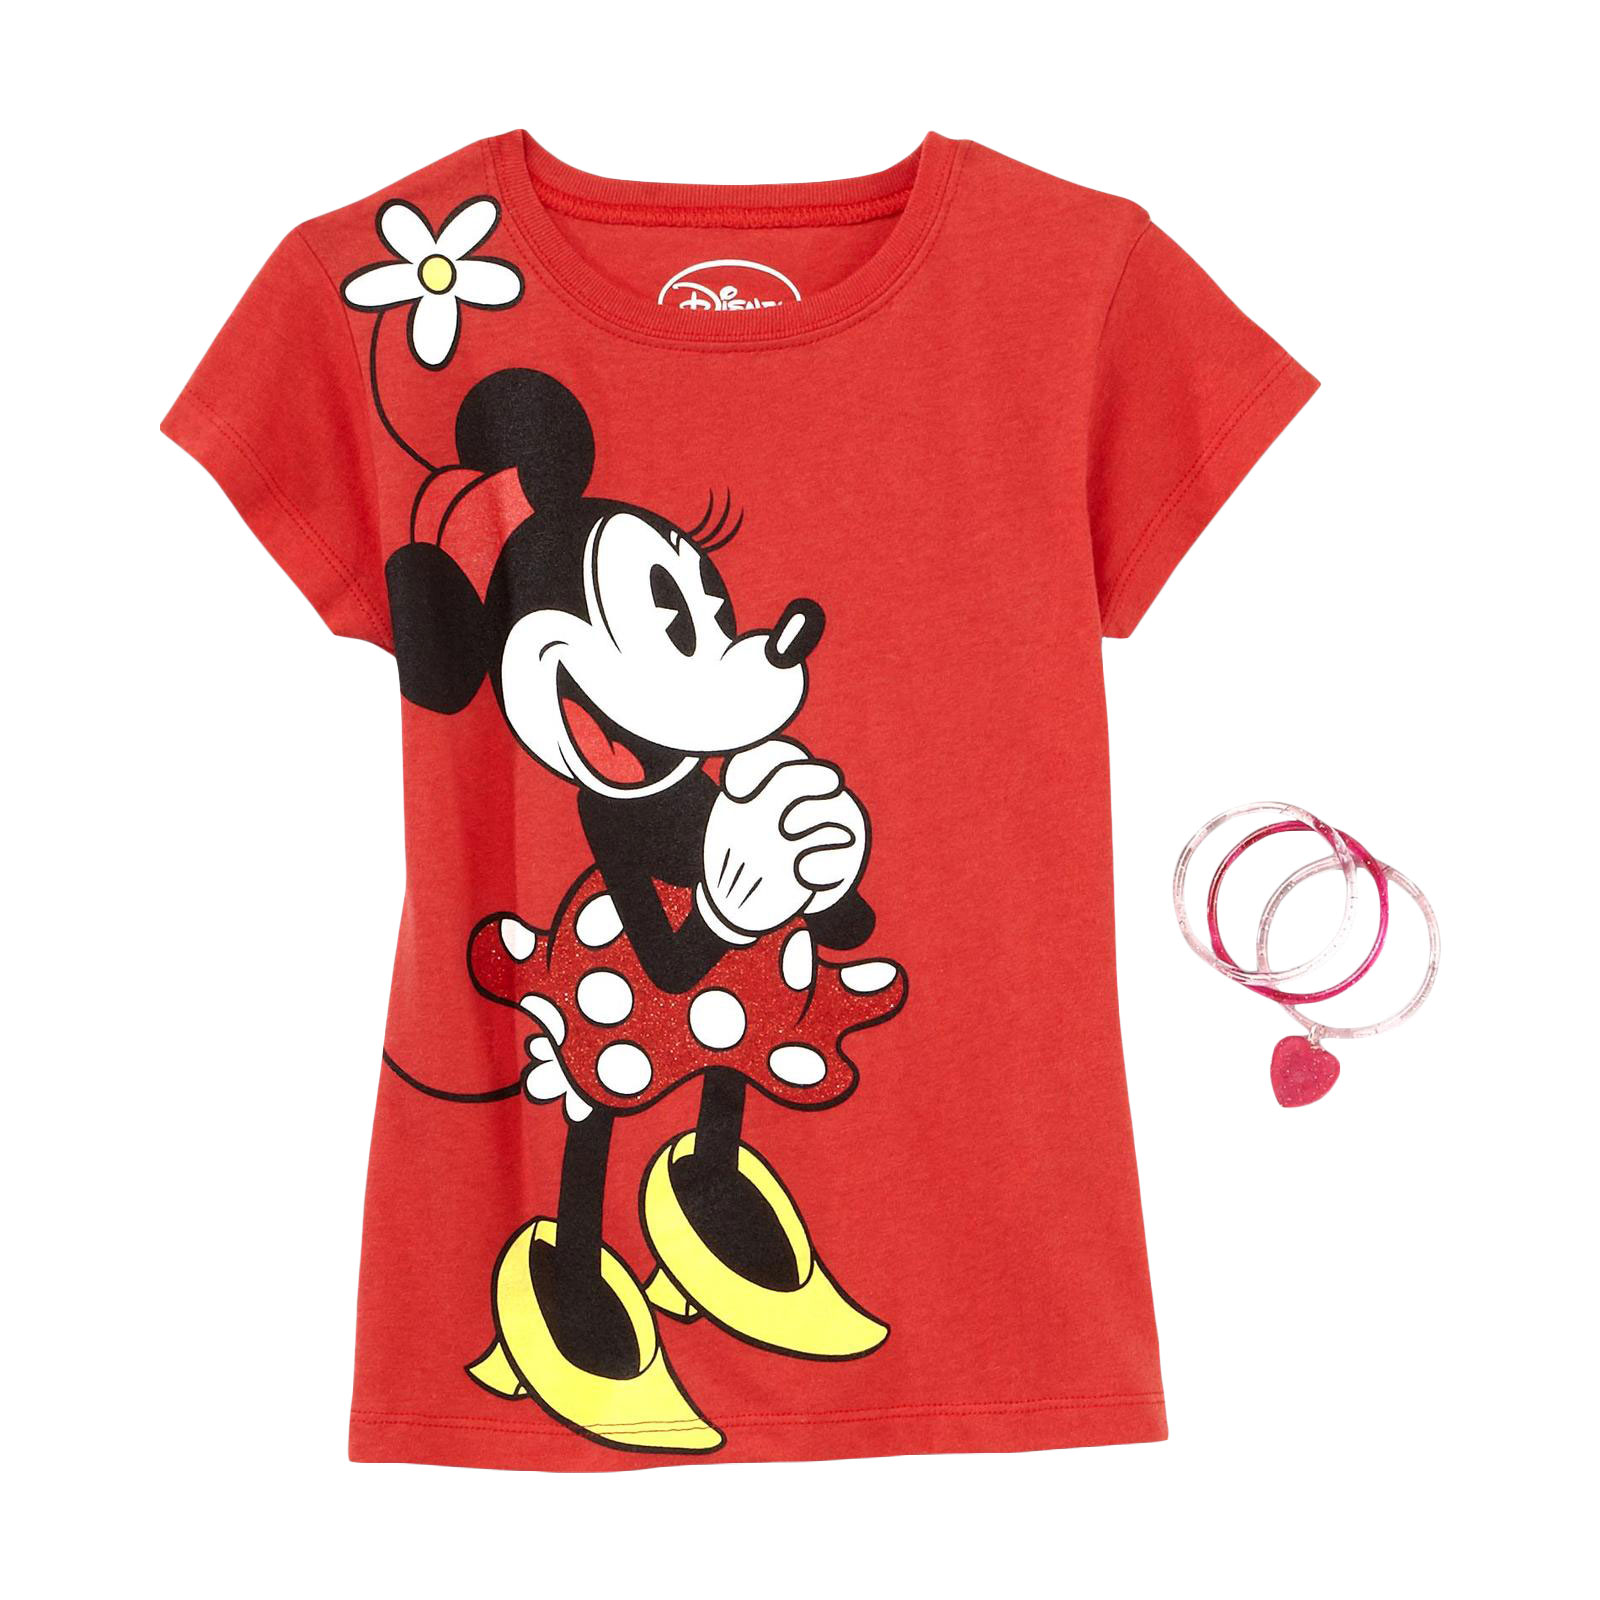 Disney Minnie Mouse Toddler Girl's Graphic T-Shirt Set